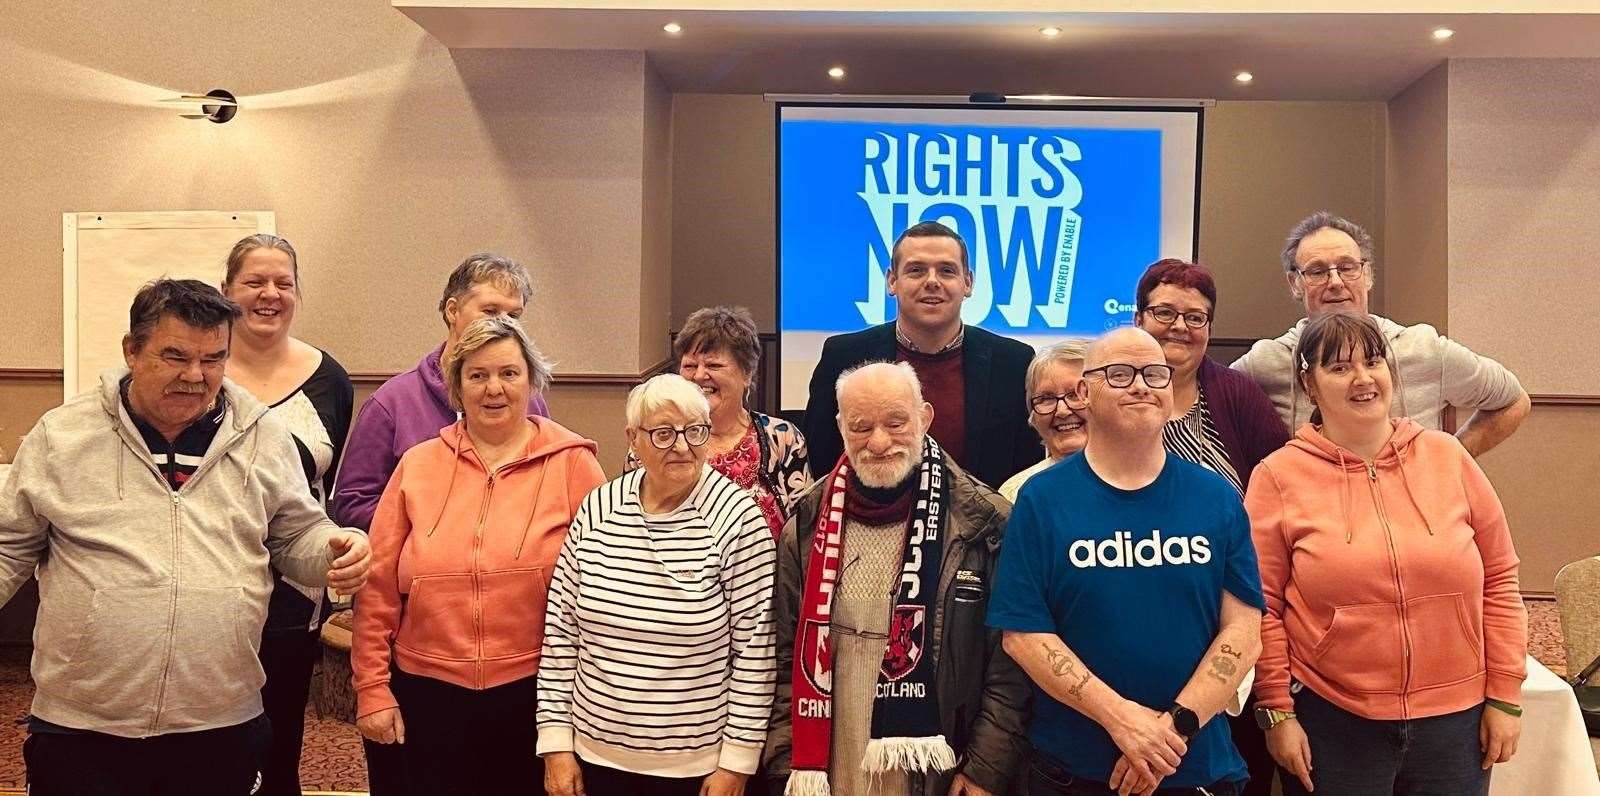 Members of Enable Elgin met with Moray MP Douglas Ross to discuss their Rights Now campaign